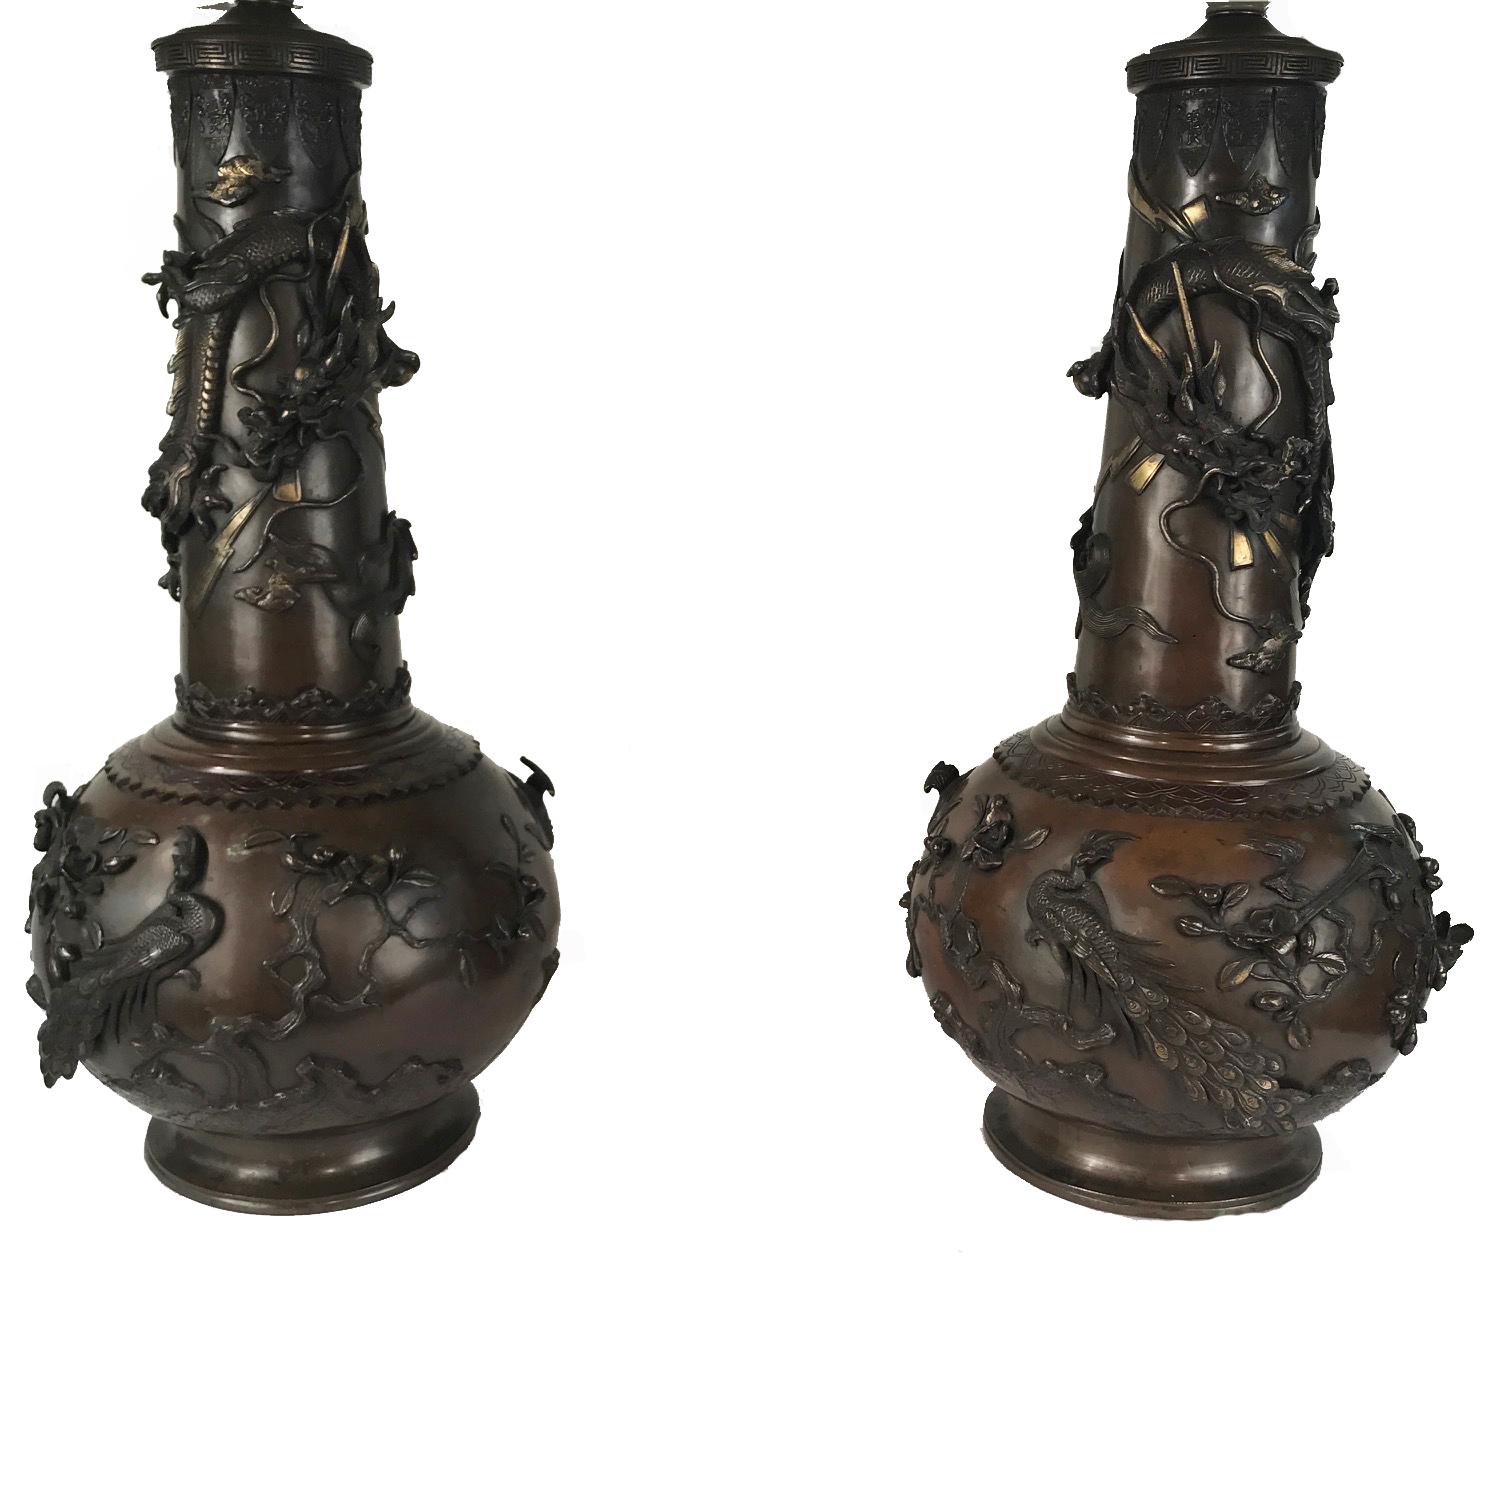 This handsome pair of lamps are at once highly ornamental and useful. An oversized pair of Japanese bronze vases of tall bottle form, each with a bulbous lower section embellished with birds amidst gnarled branches, leaves and buds raised in high